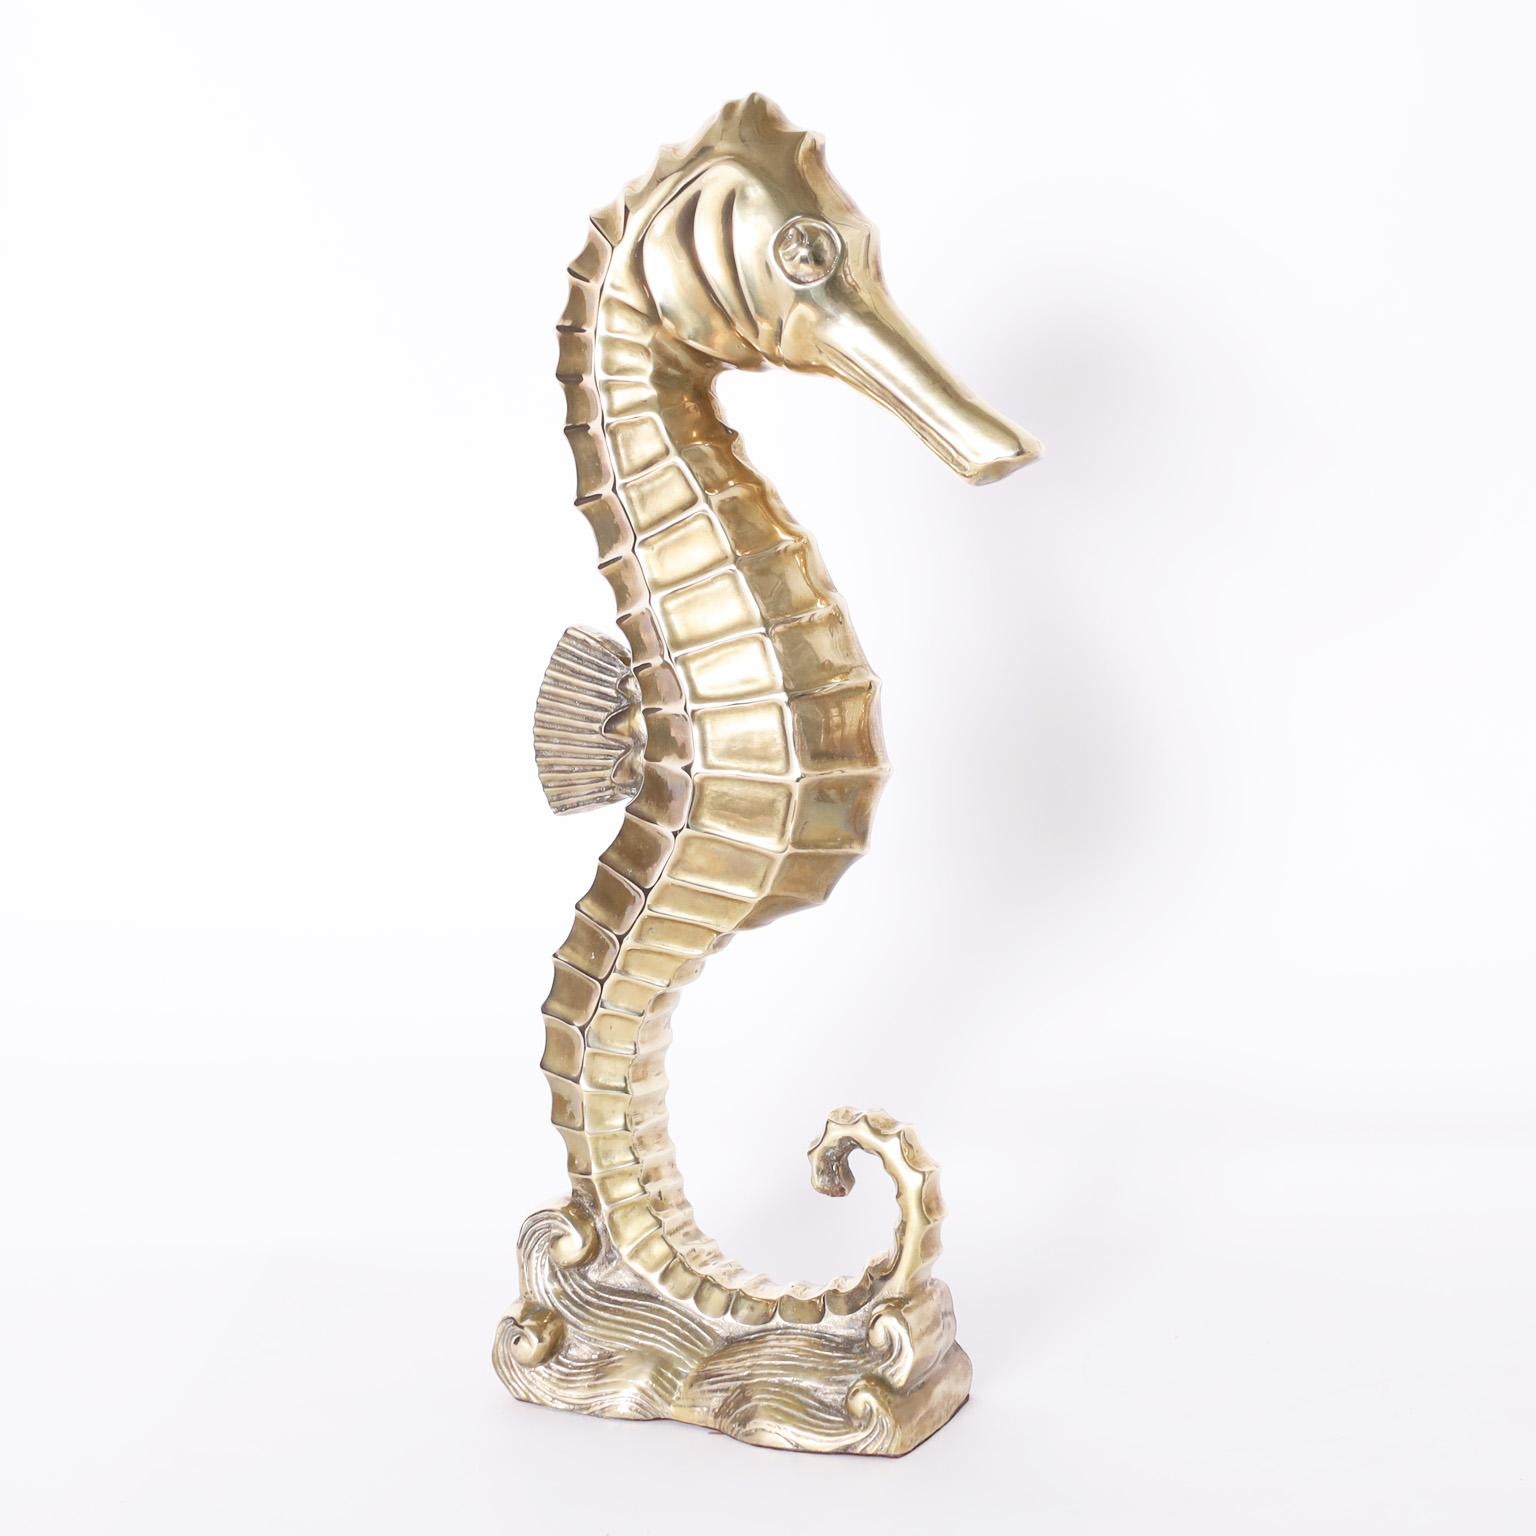 Striking pair of vintage cast brass seahorse sculptures or objects of art with a dramatic stylized form. Priced individually. 

Measurements:

Left measures H: 18.5 W: 8 D: 4  Ref: 6547

Right measures H: 17.5 W: 8 D: 3.5  Ref: 6530.